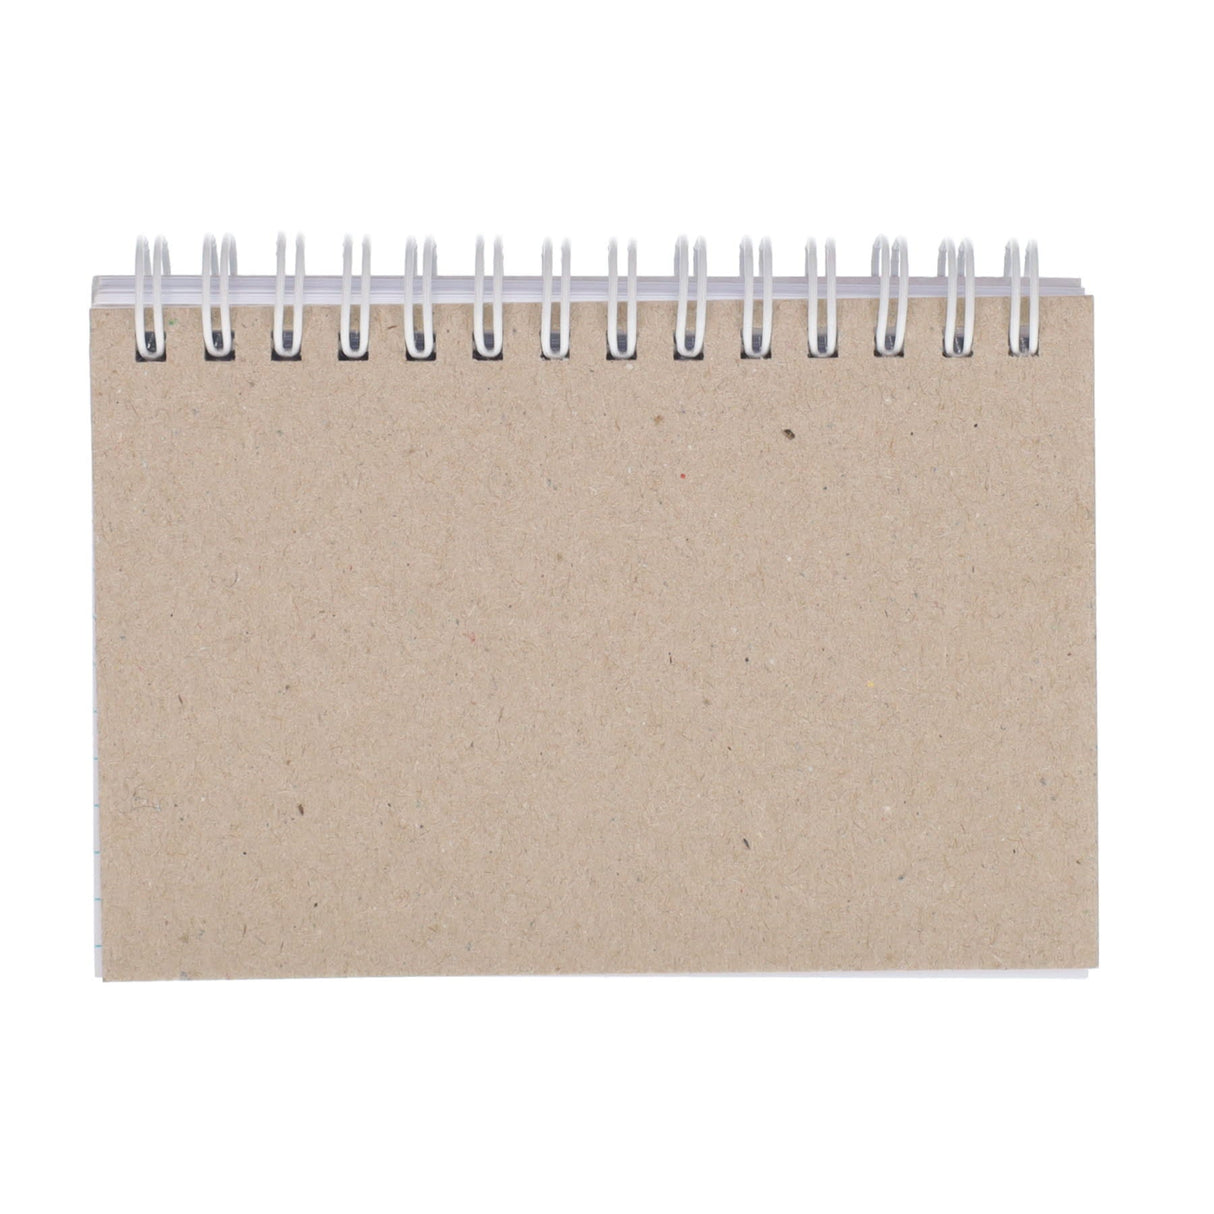 Concept 5x3 Spiral Ruled Index Cards - White - 50 Cards | Stationery Shop UK